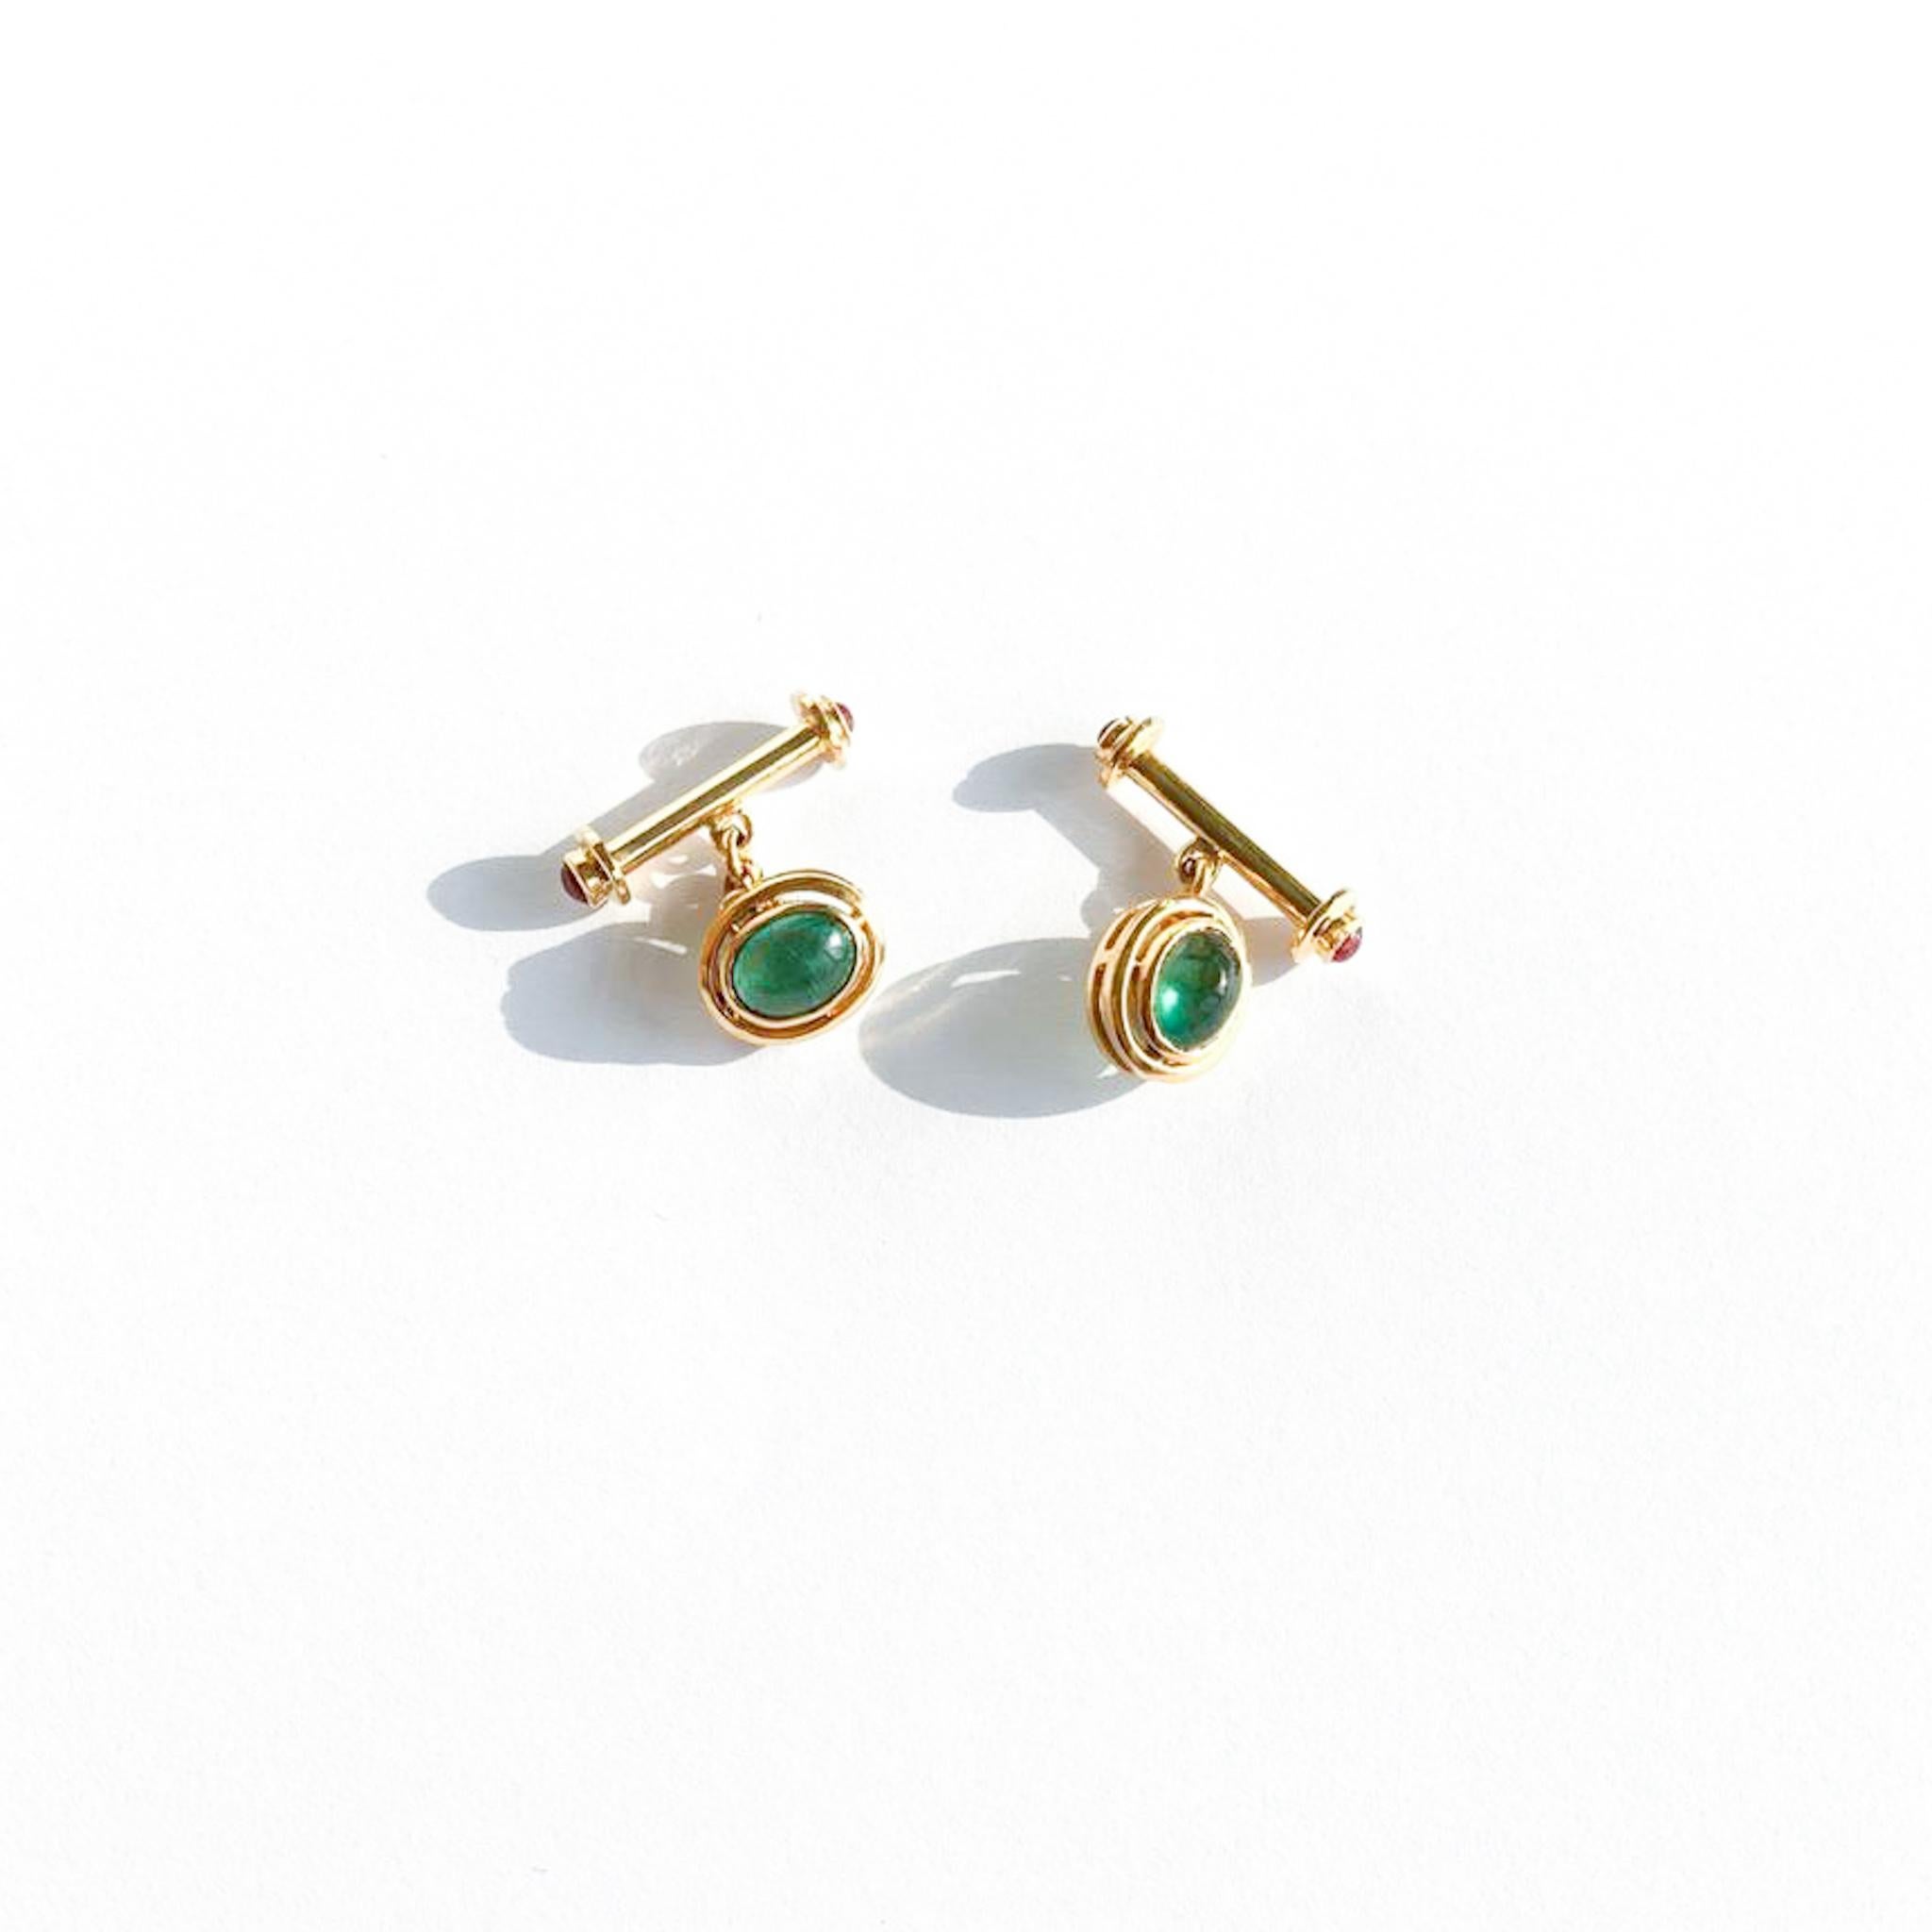 The epitome of subtle elegance, these cabochon gemstone cufflinks are the perfect everyday piece for any occasion --from days at the office to dinner parties and black tie events. And of course the perfect Holiday Gift. 

Brilliant cabochon